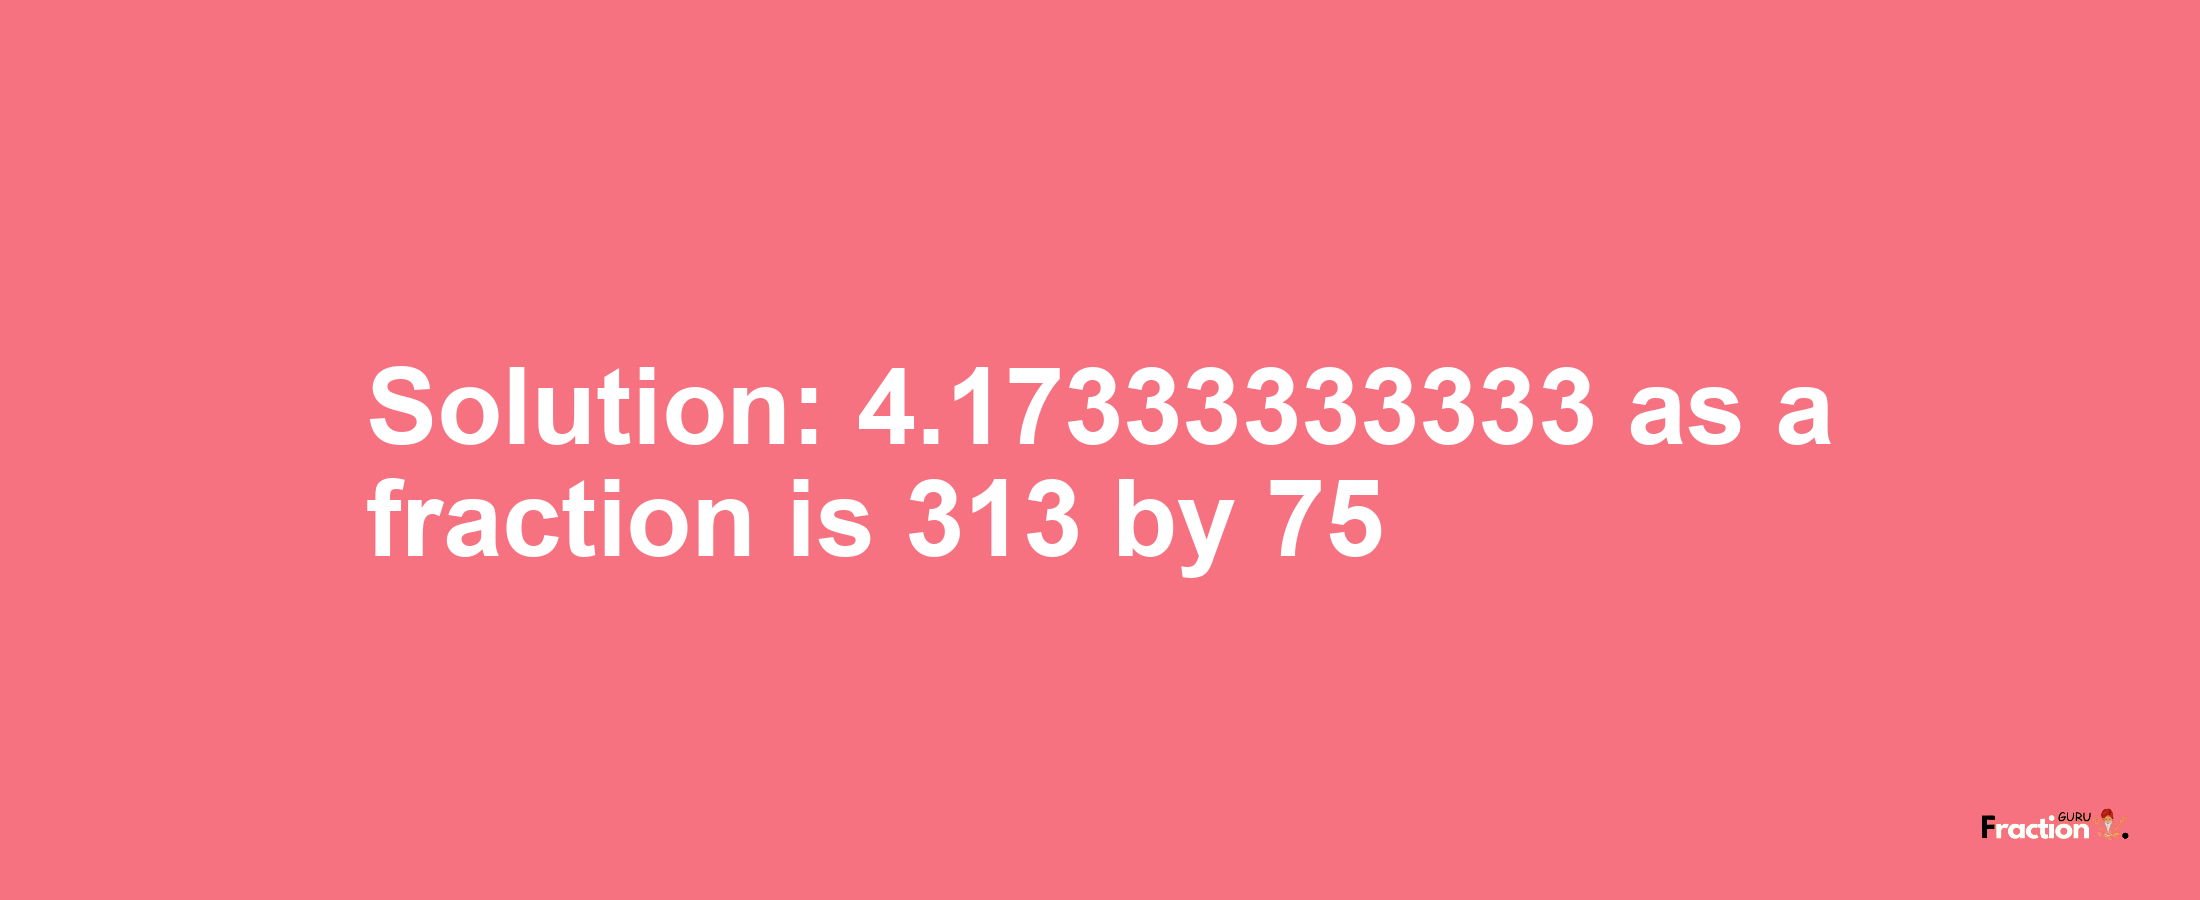 Solution:4.17333333333 as a fraction is 313/75